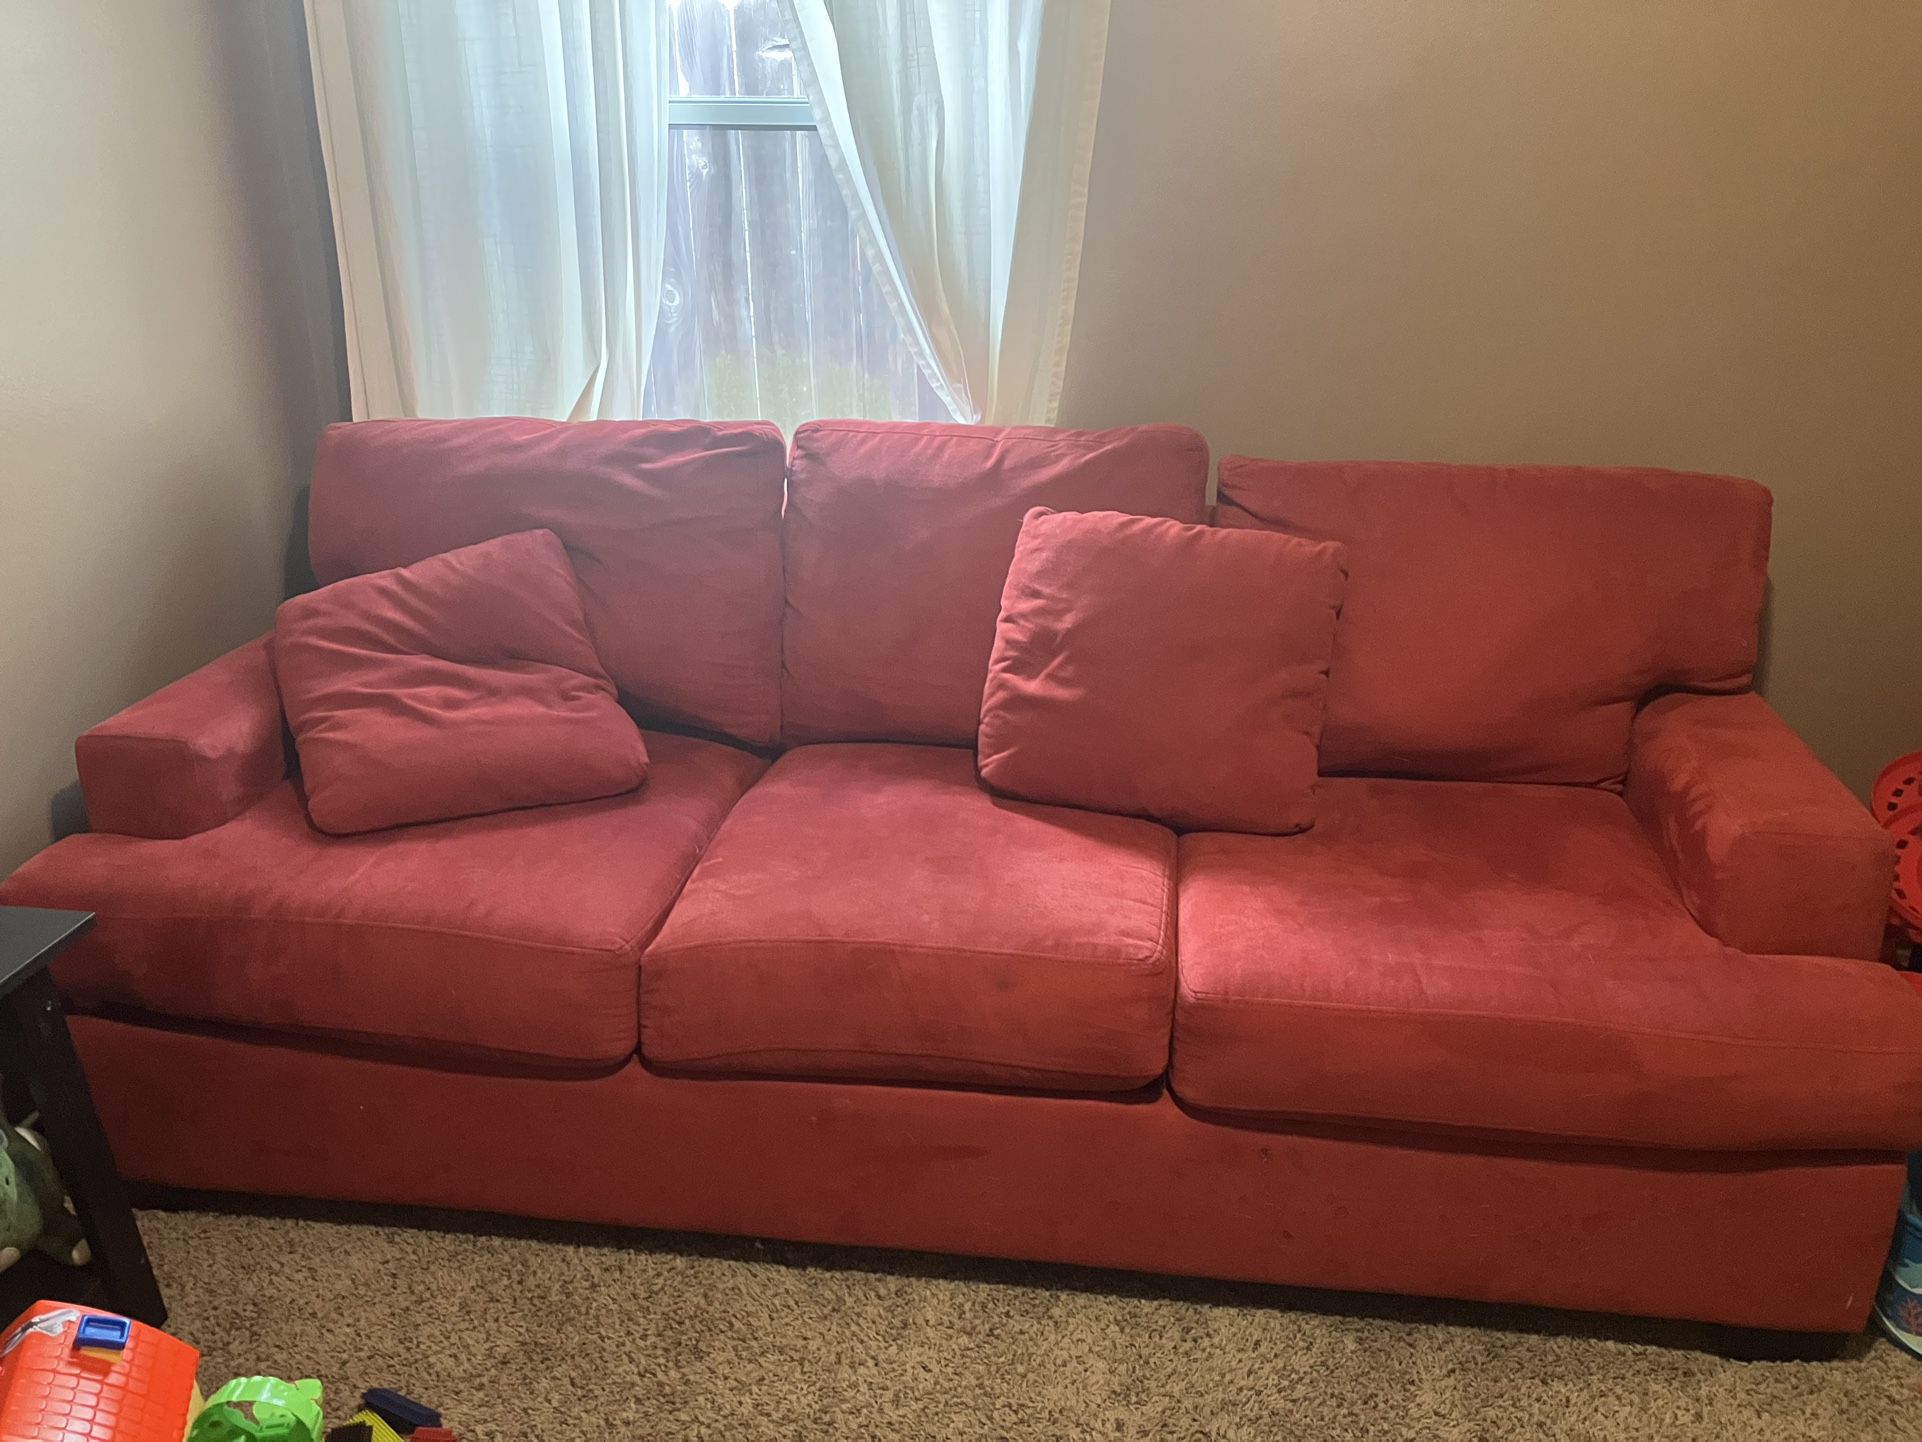 Red Couch For Sale, Must Pick Up